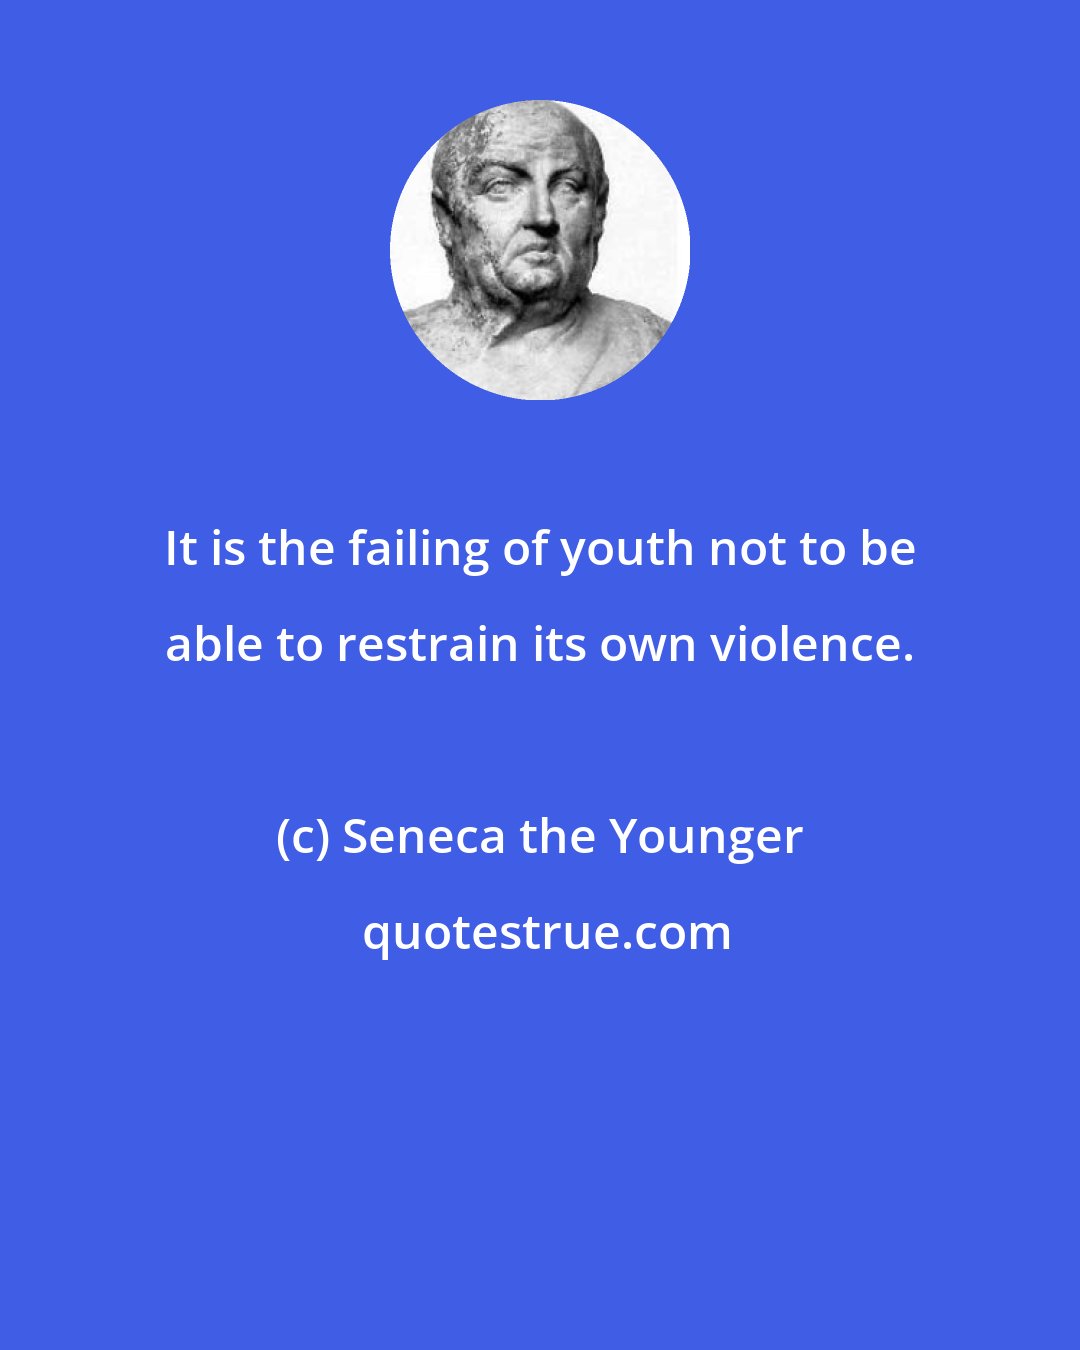 Seneca the Younger: It is the failing of youth not to be able to restrain its own violence.